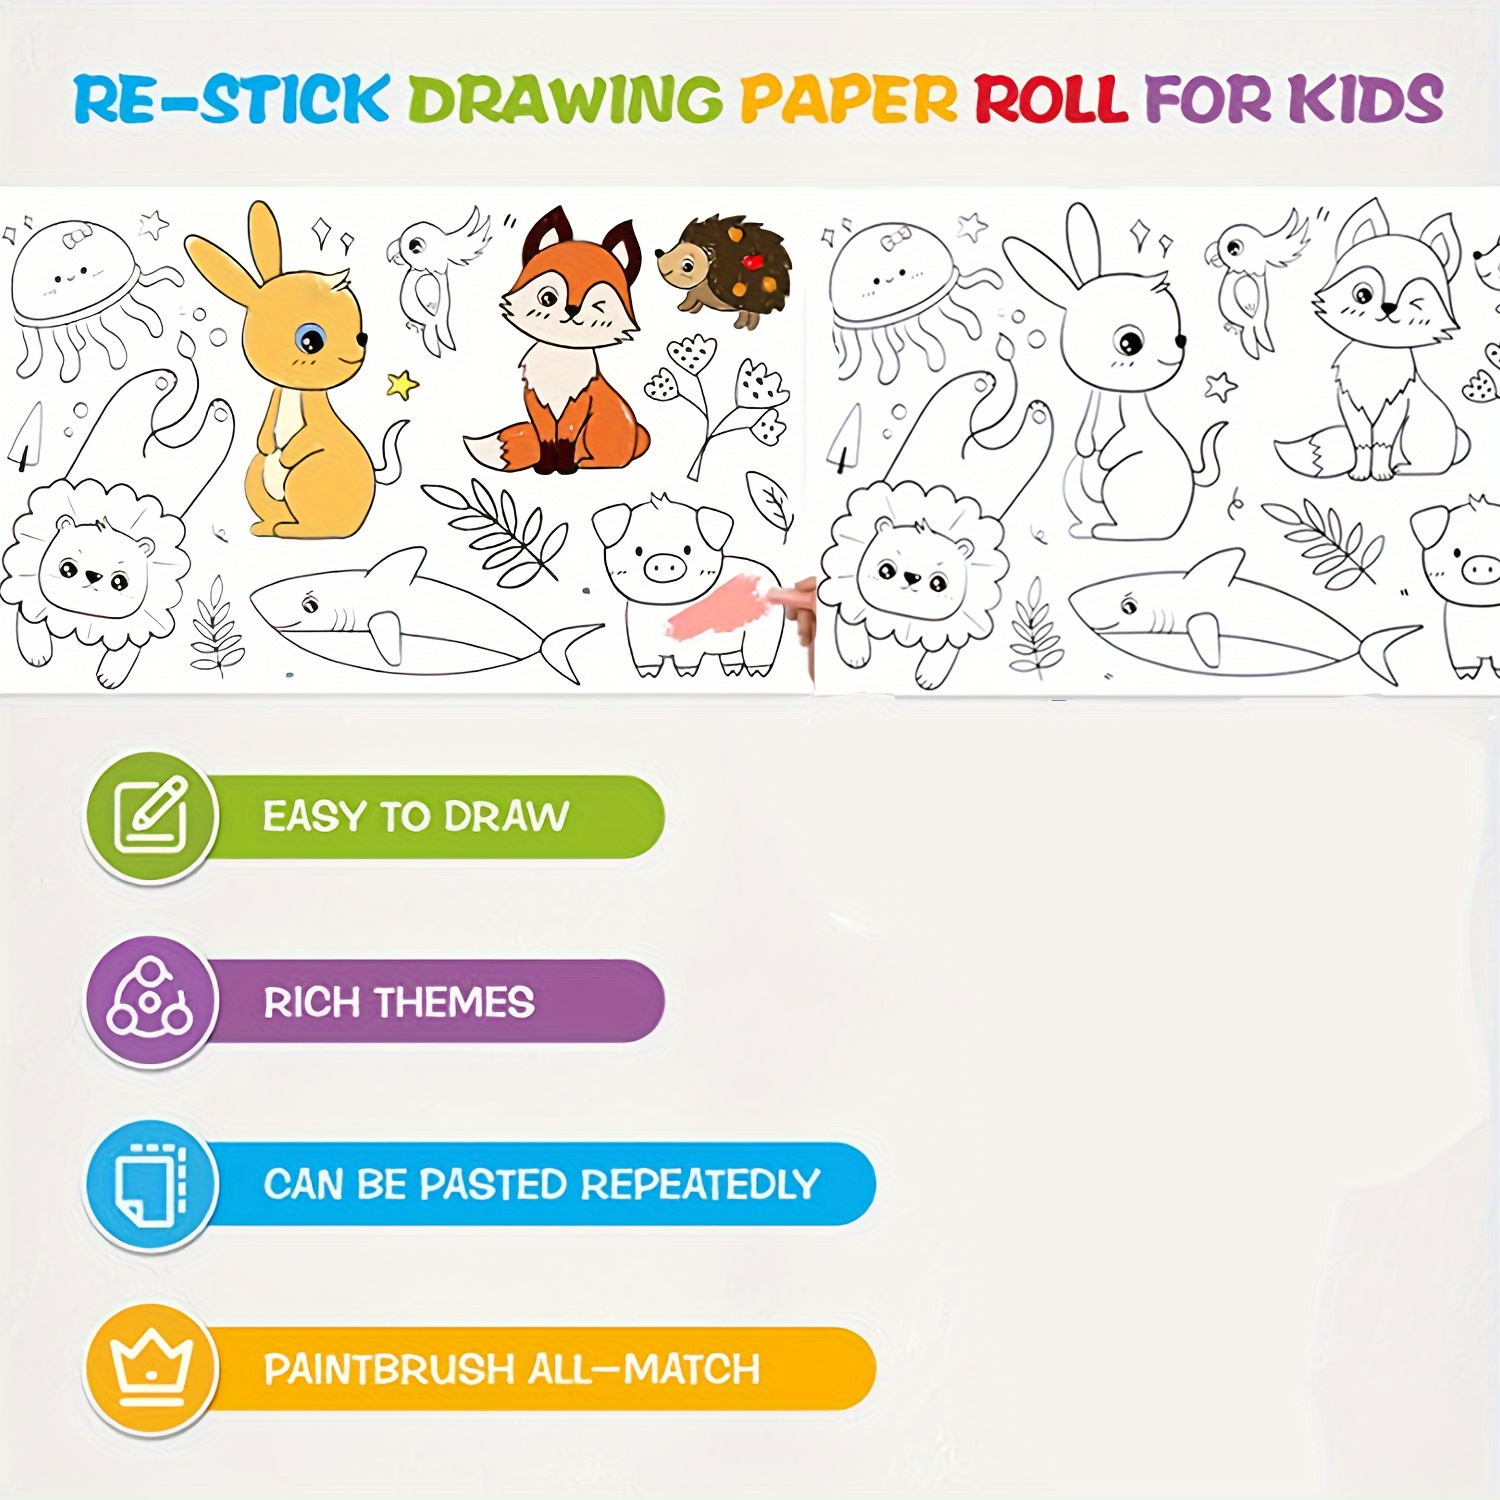  Children's Drawing Roll Coloring Paper Roll for Kid